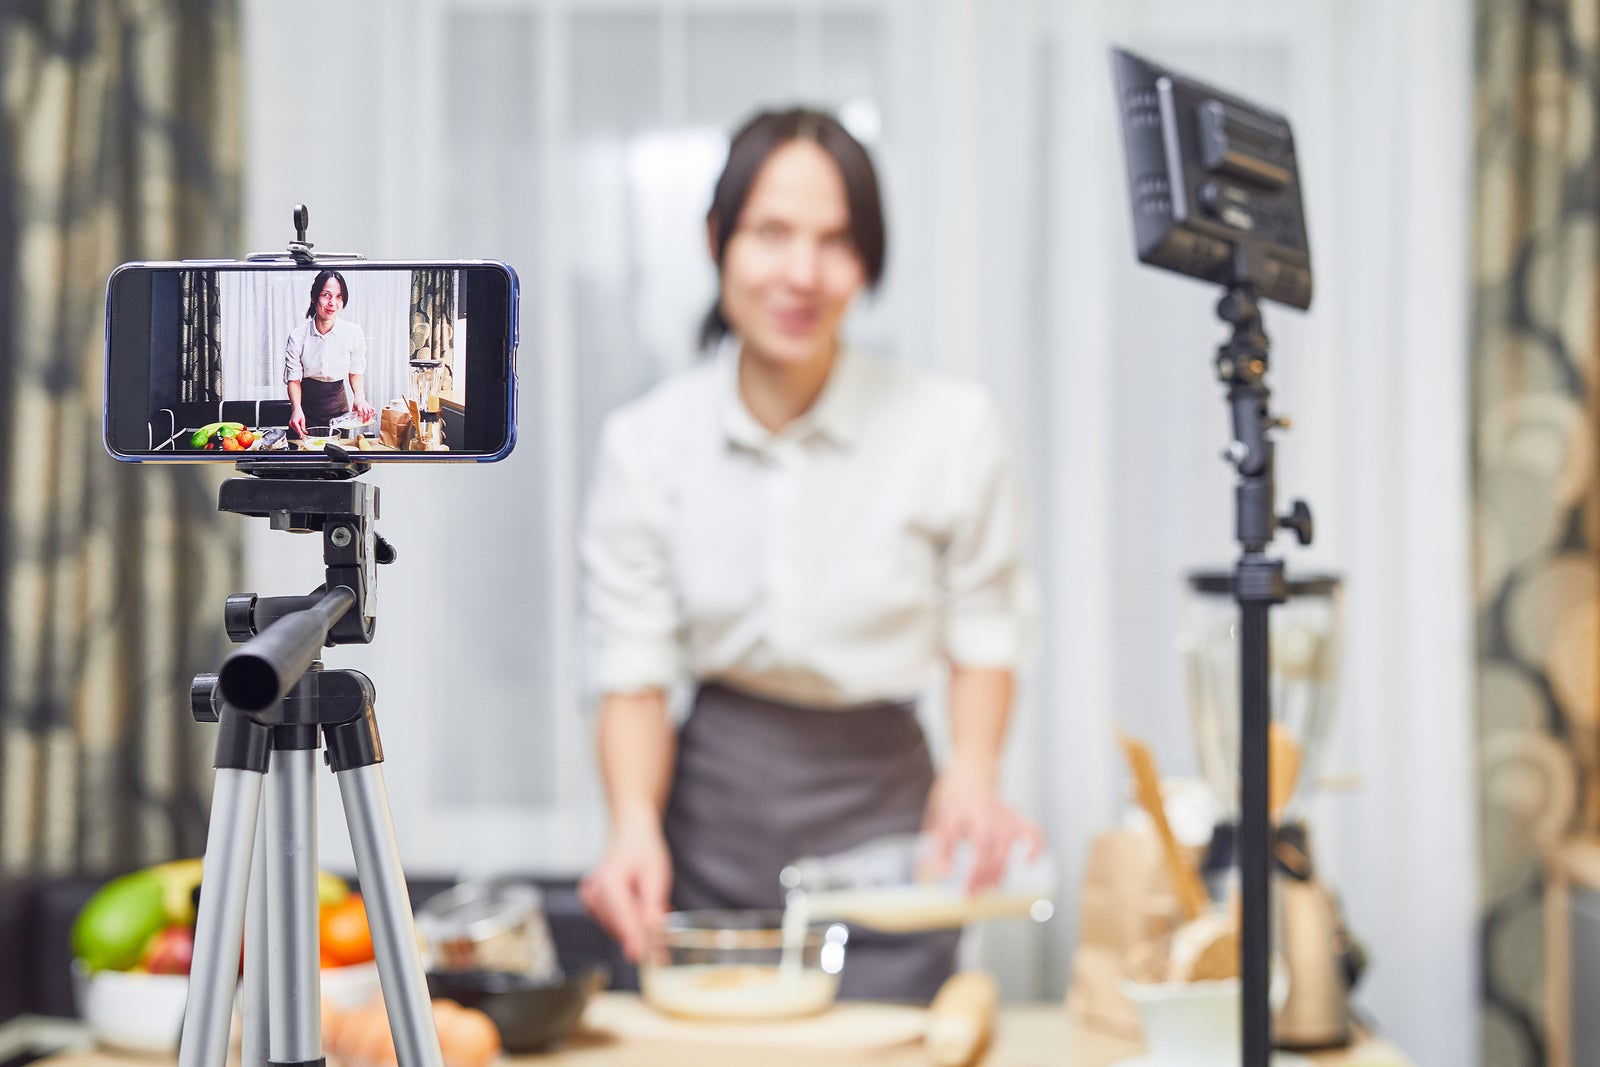 Vlogger freelance job, food concept. Young caucasian woman cooking and recording live video for vlog and social media with phone camera in their kitchen